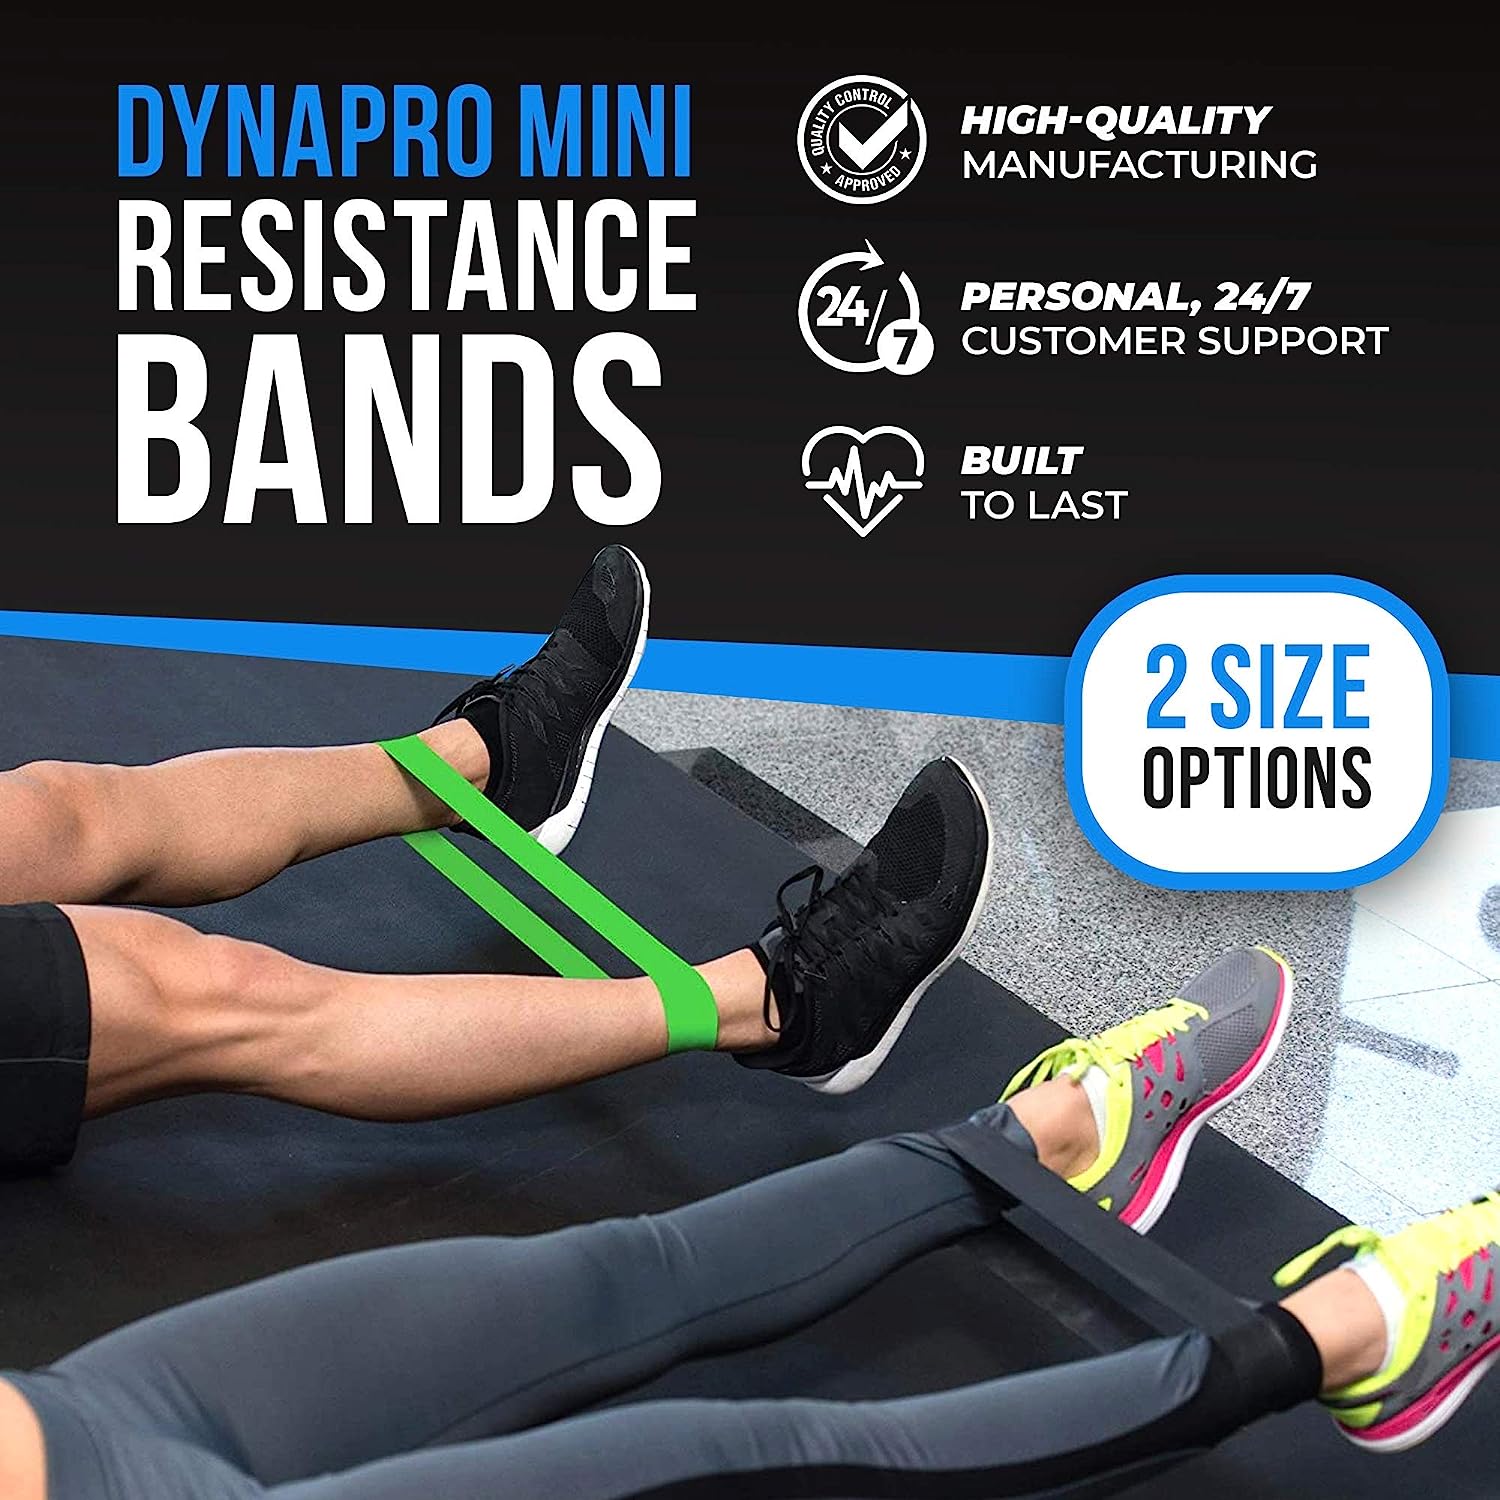 How Long Will Resistance Bands Last?